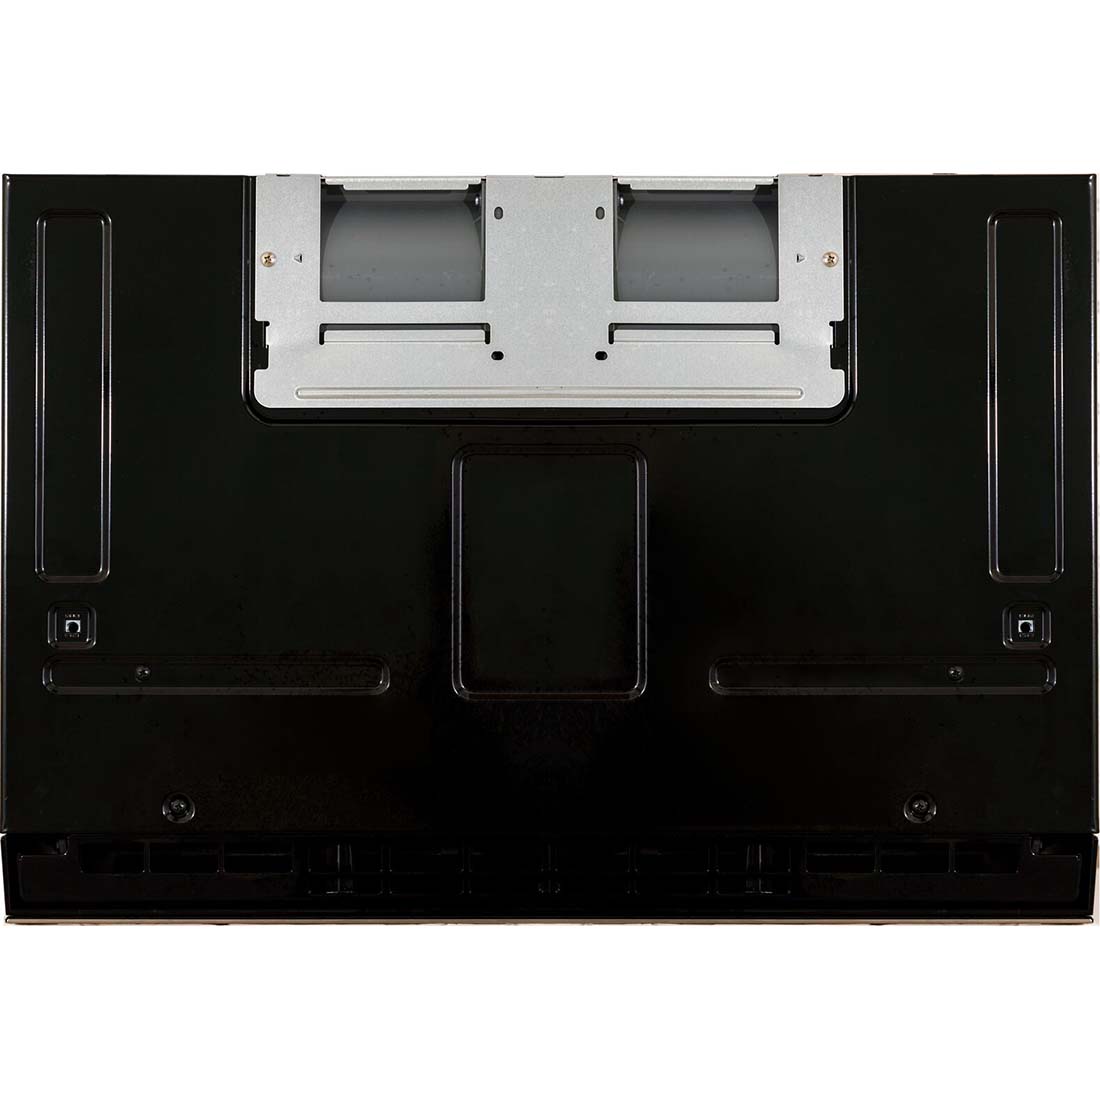 Forté 24 in. 1.3 cu. ft. Over the Range Microwave in Stainless Steel mounting brackets.